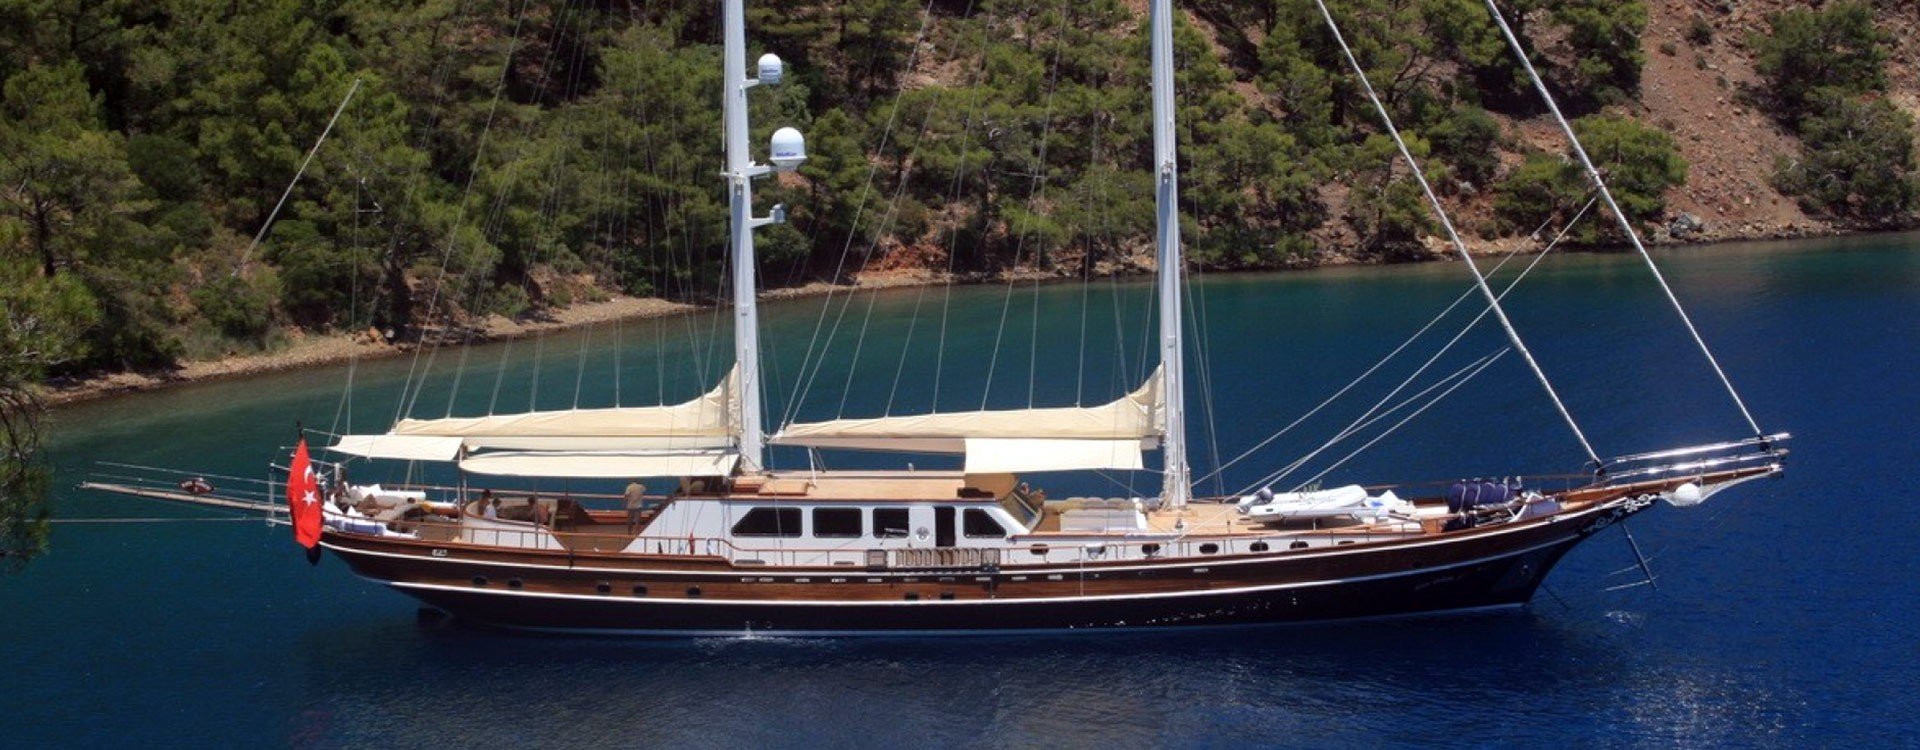 turkish gulets for charter